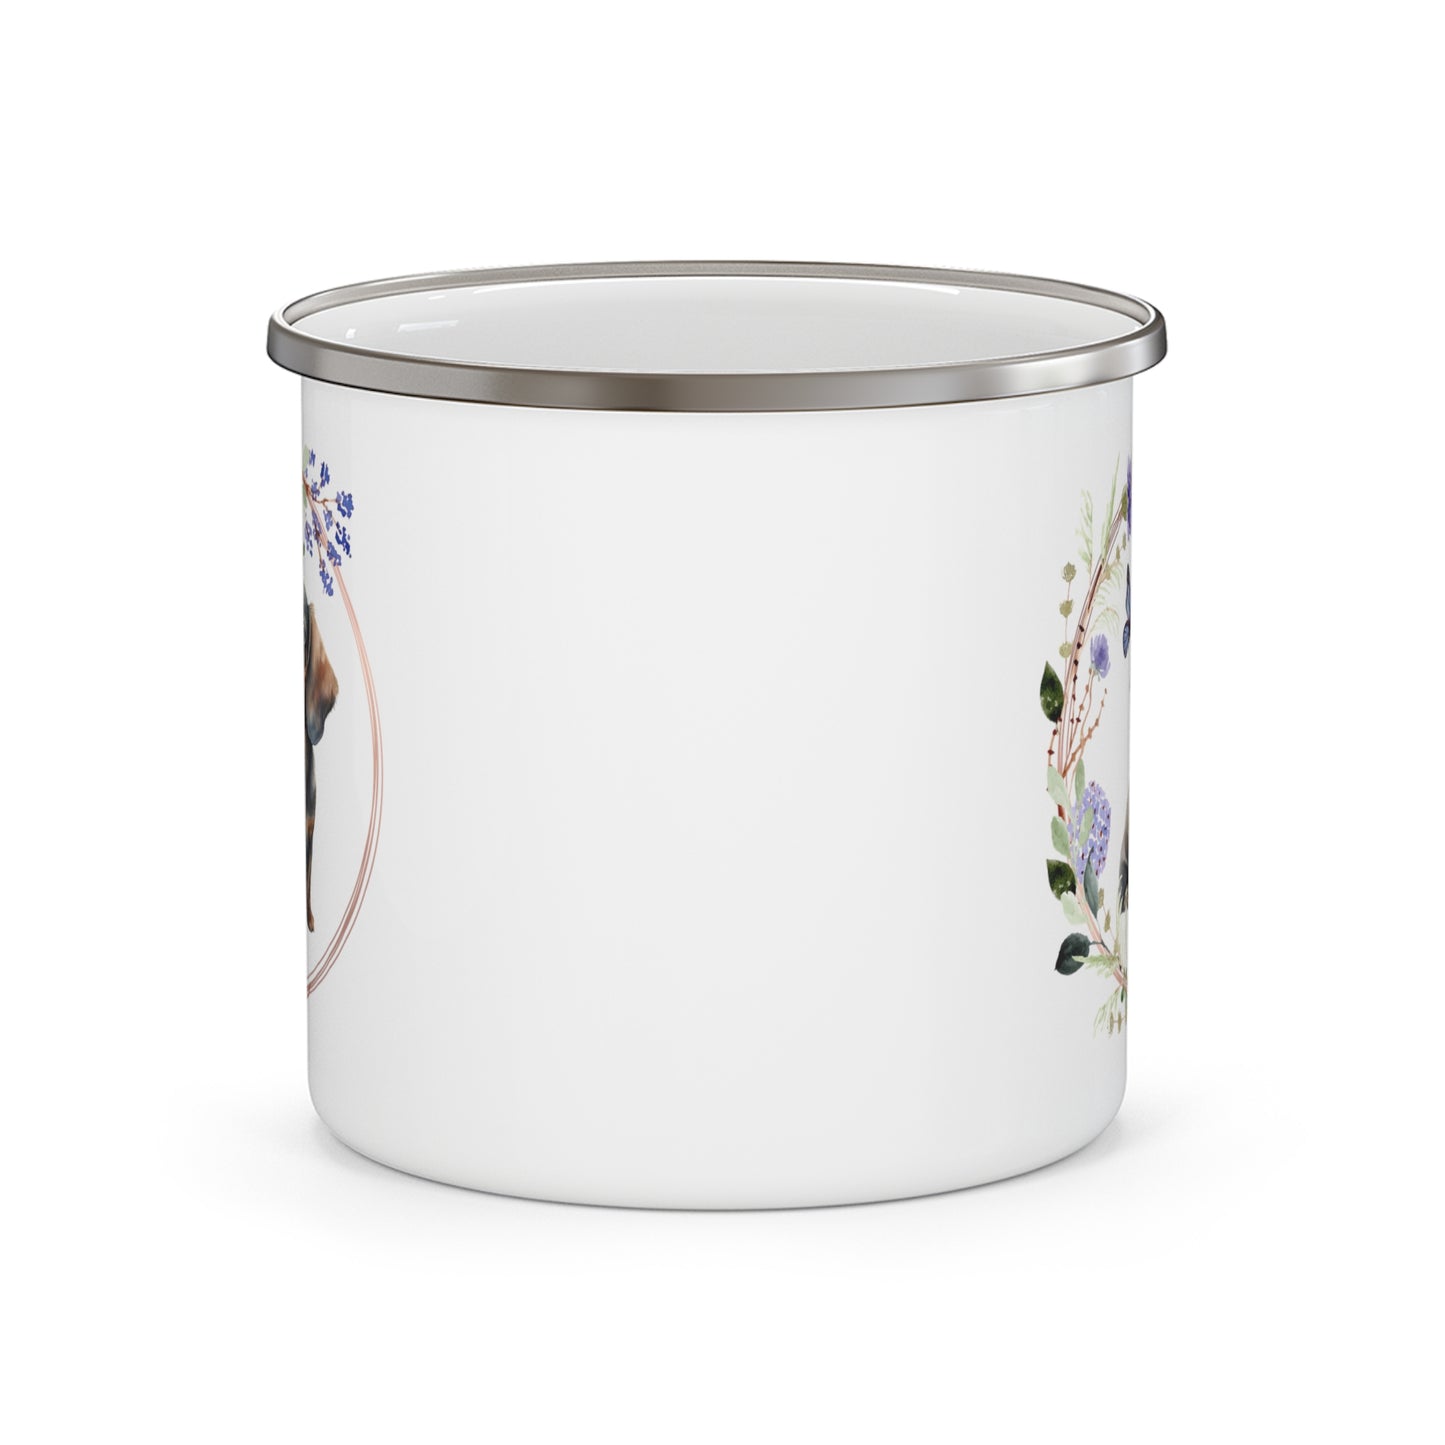 Dachshund with Periwinkle Watercolor Flowers Enamel Camping Mug